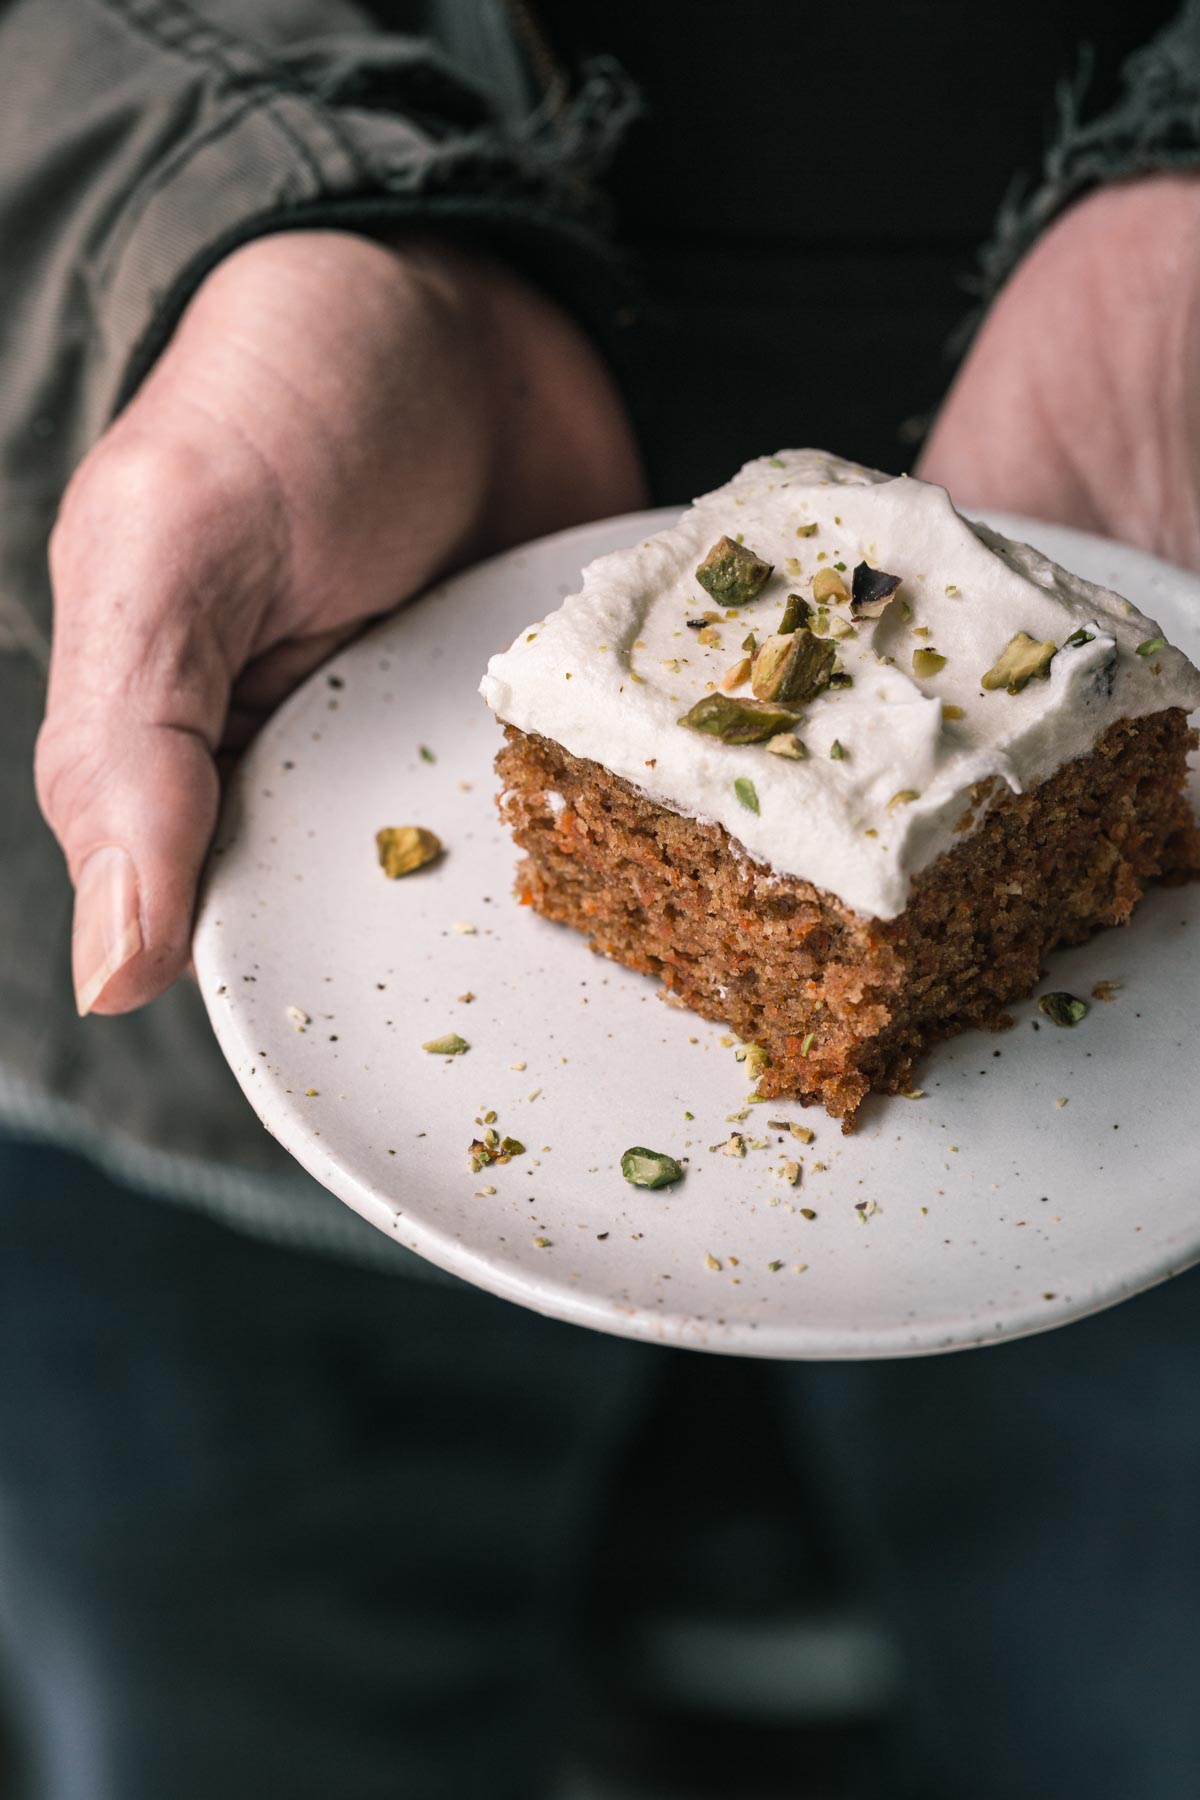 Hands holding a square of carrot cake.